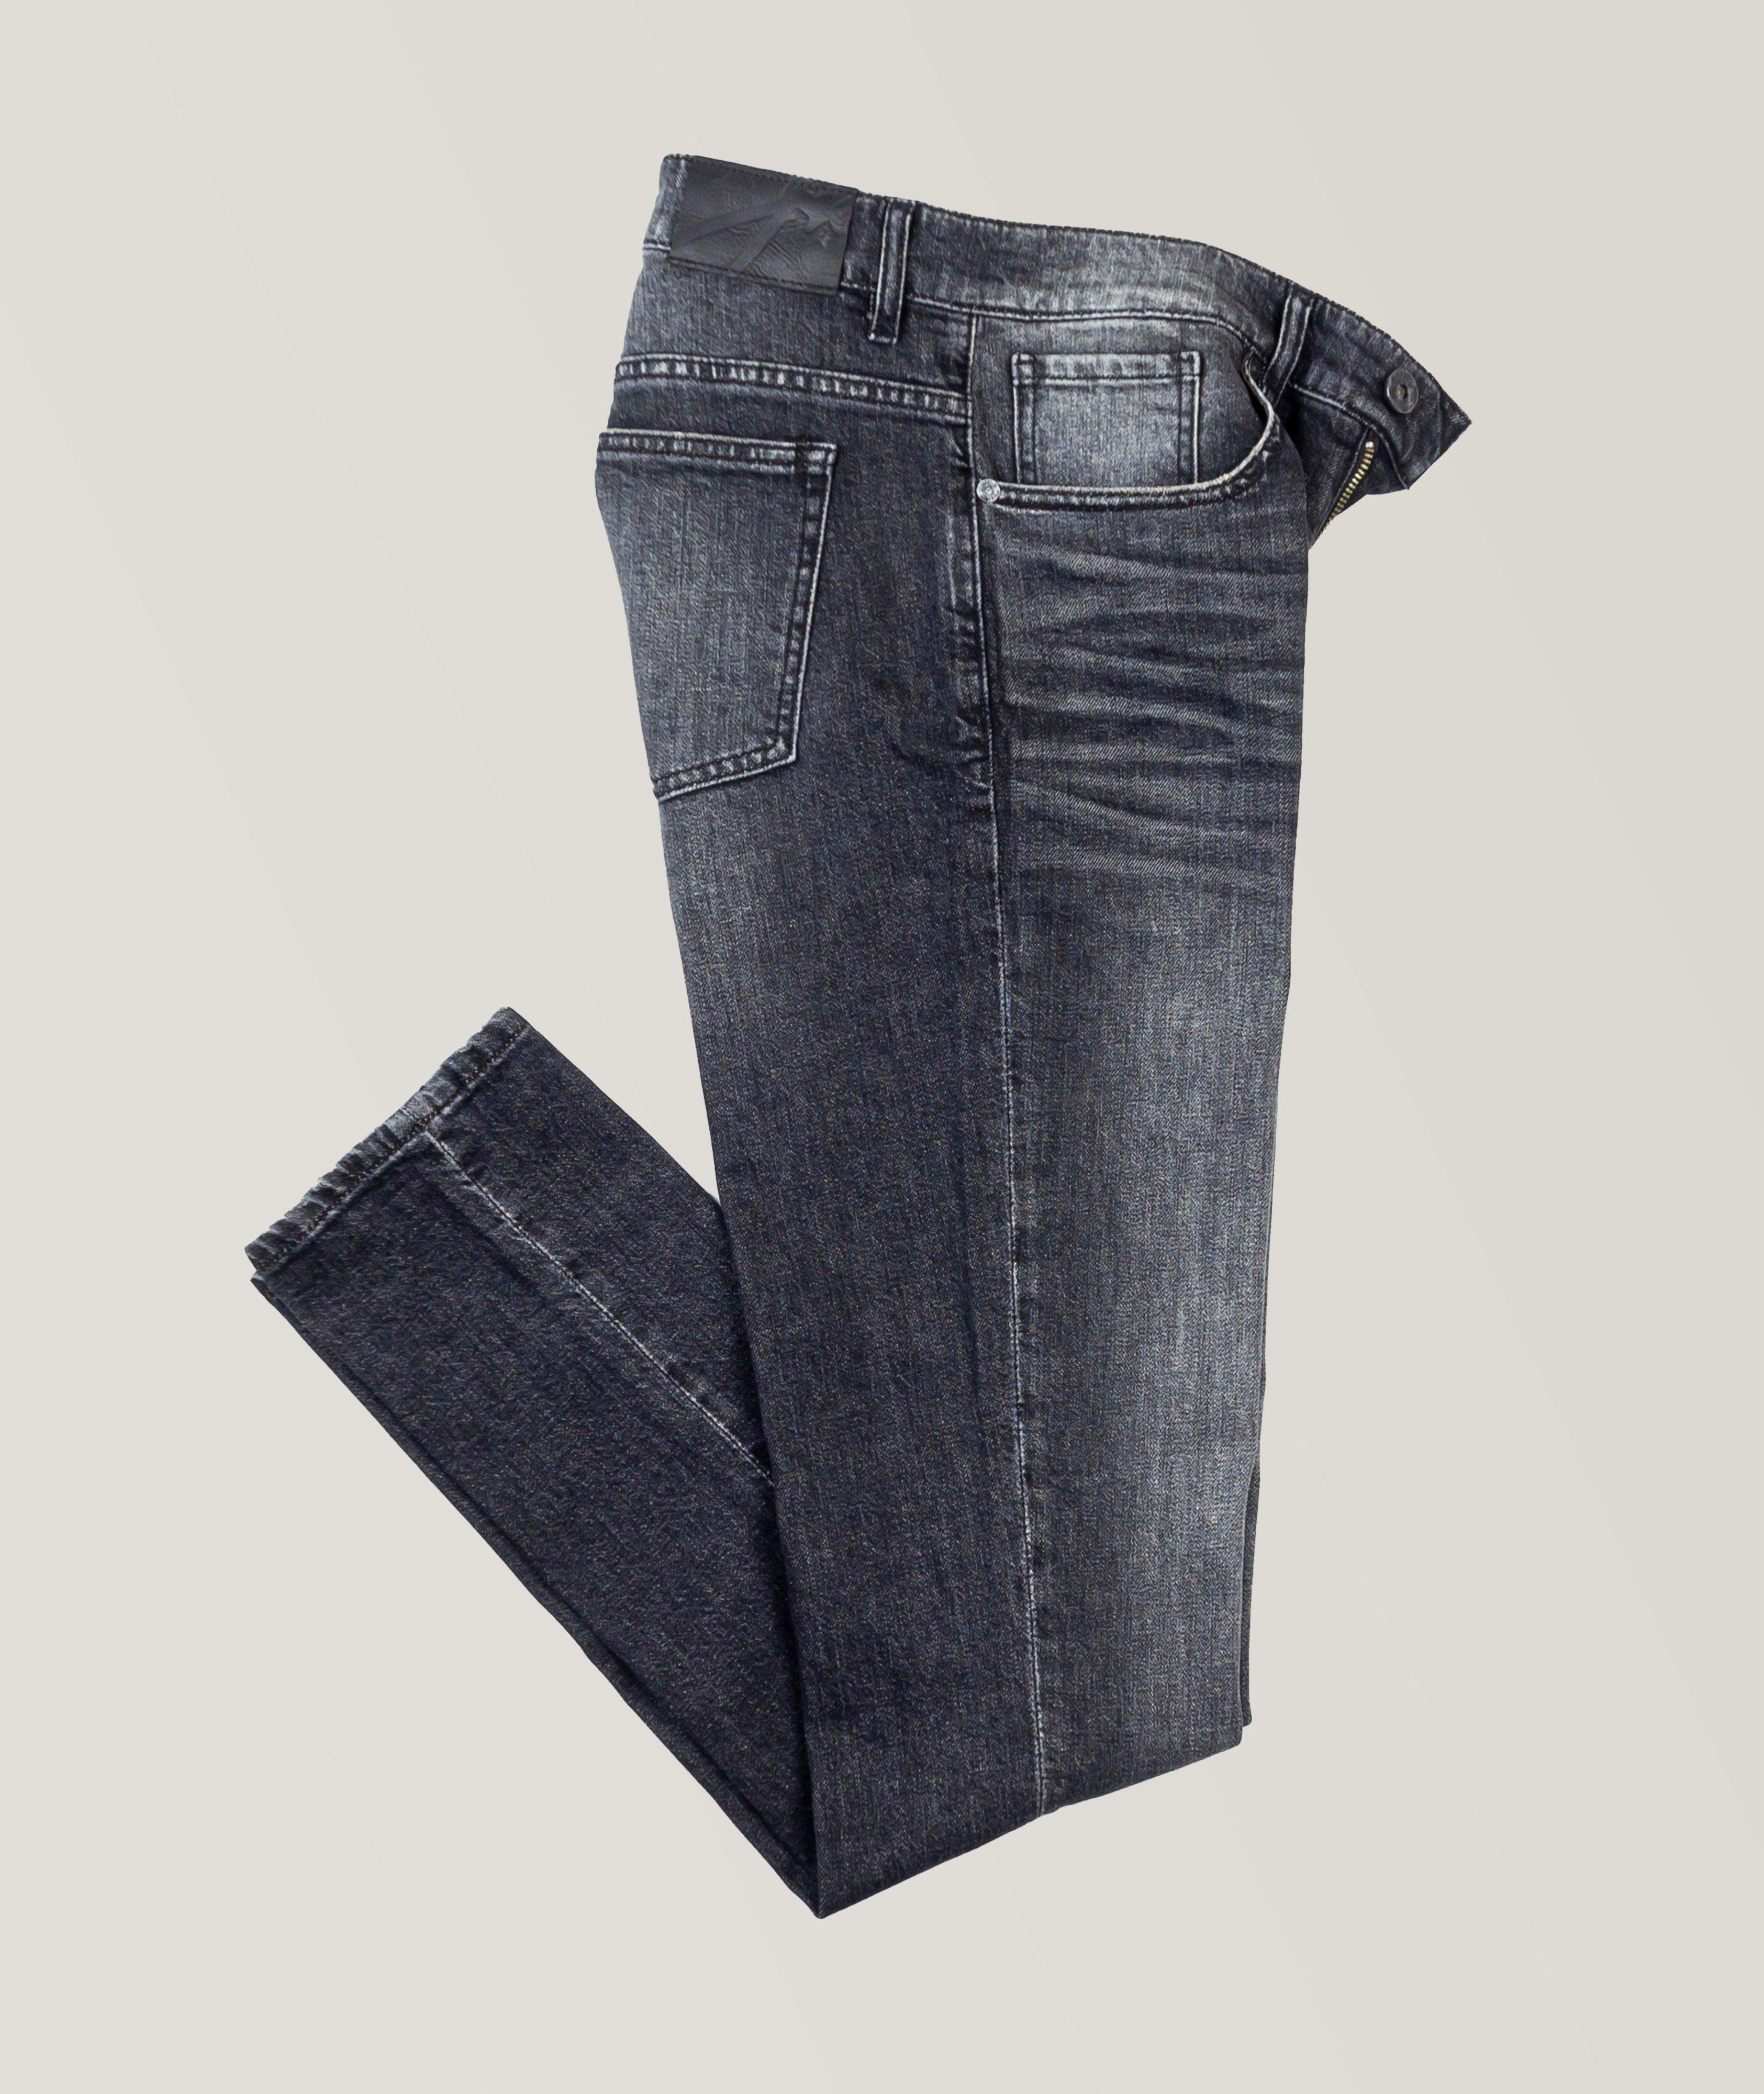 Blade Smoke Slim Tapered Fit Jeans image 0